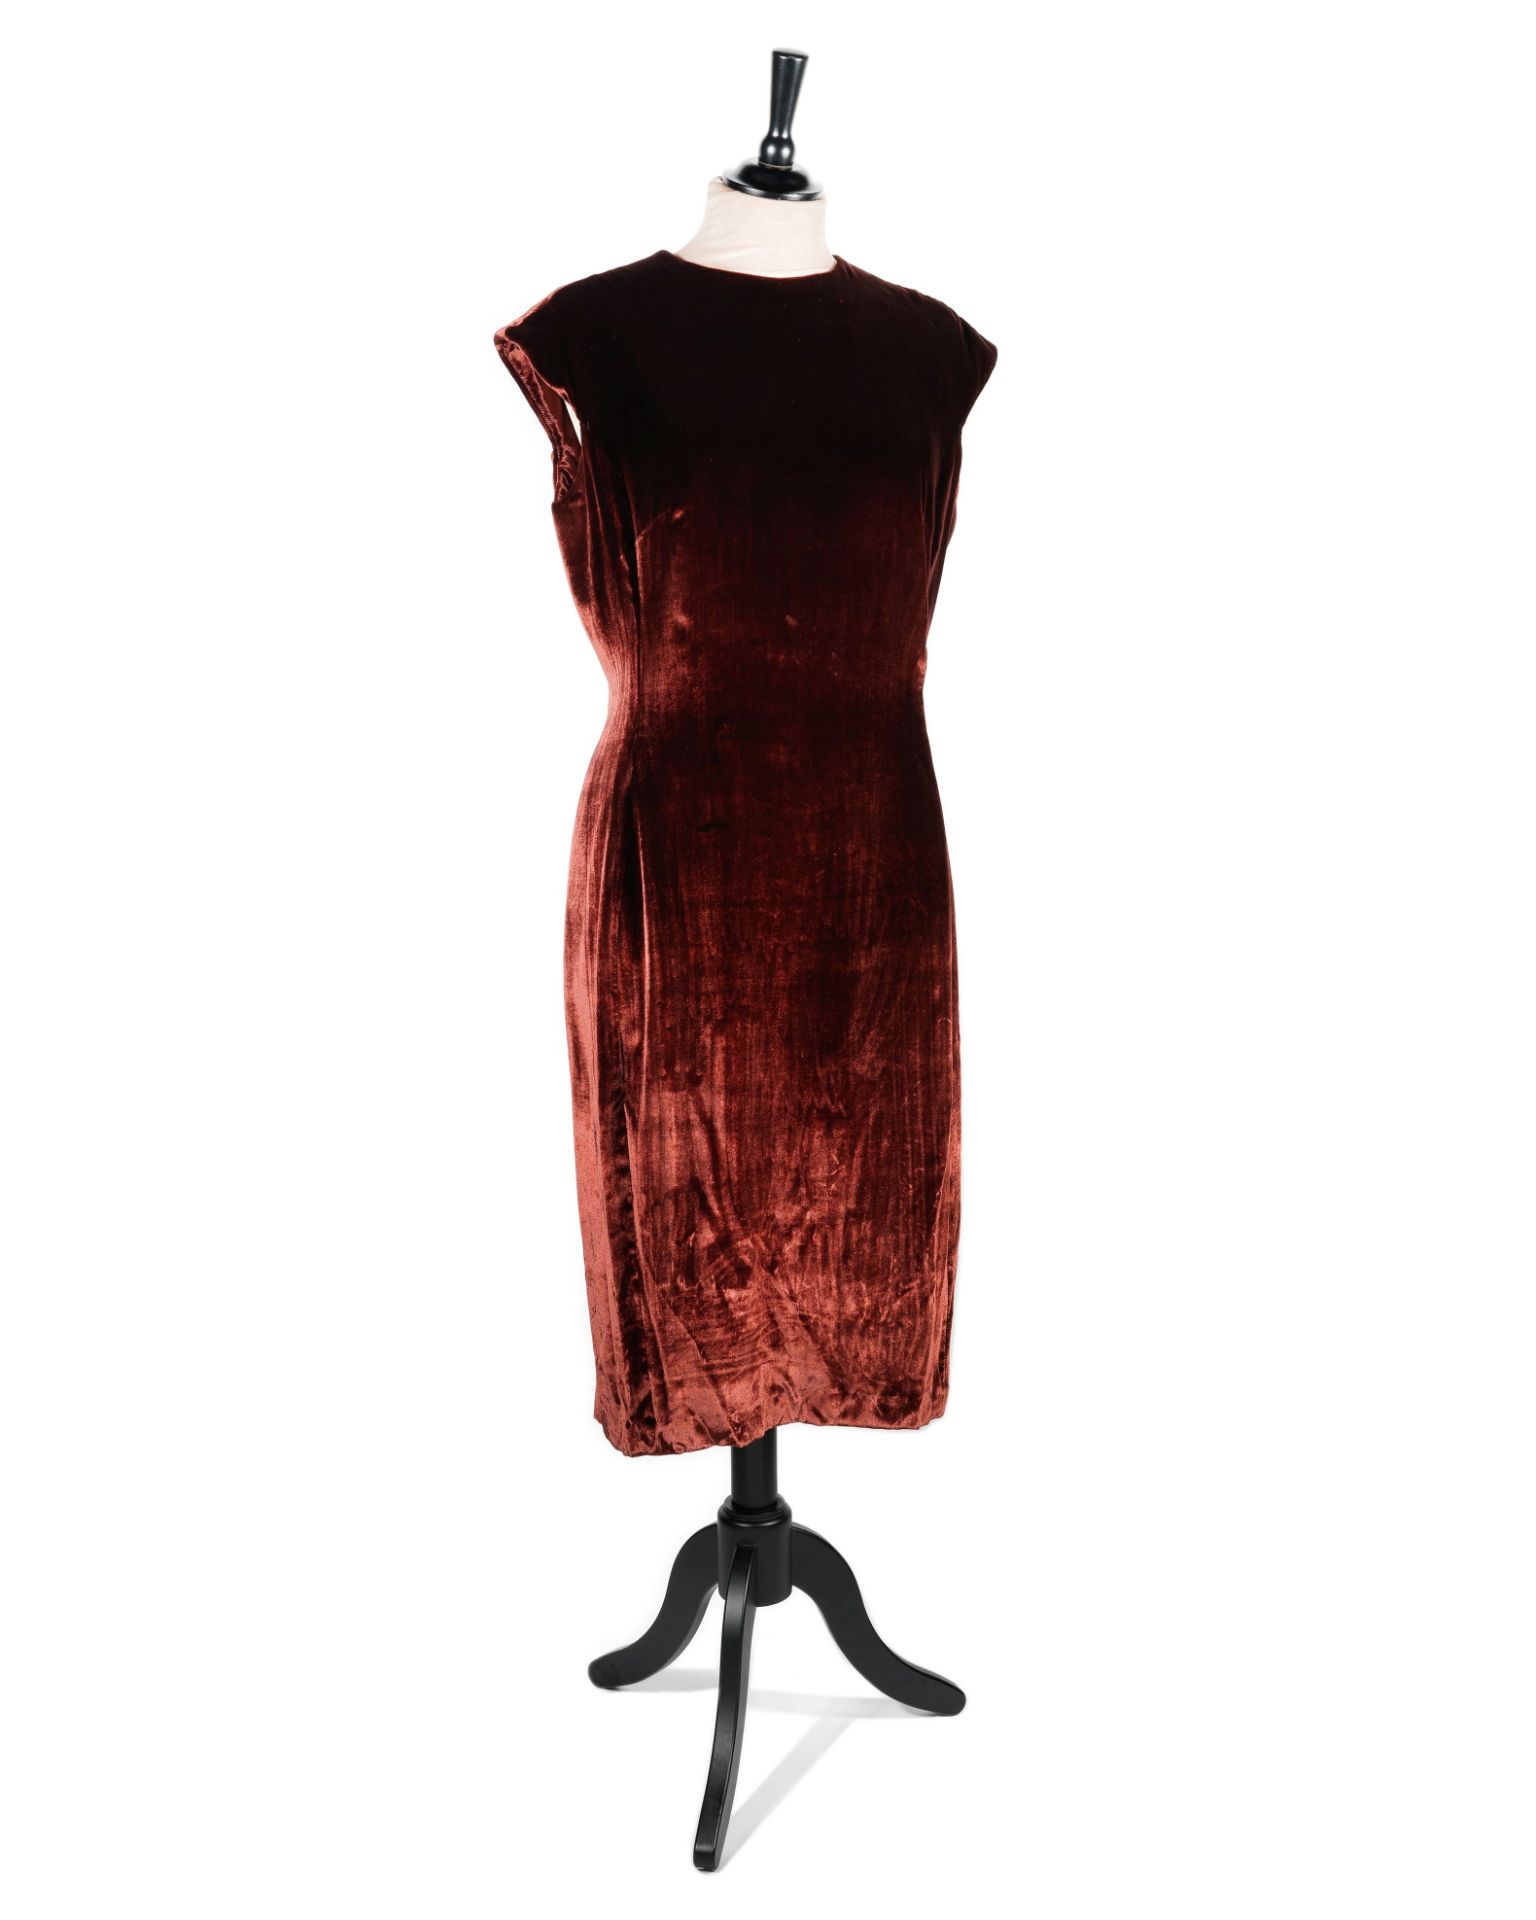 The Children Act: A screen-used red cocktail dress worn by Emma Thompson for her role as 'Fiona M...